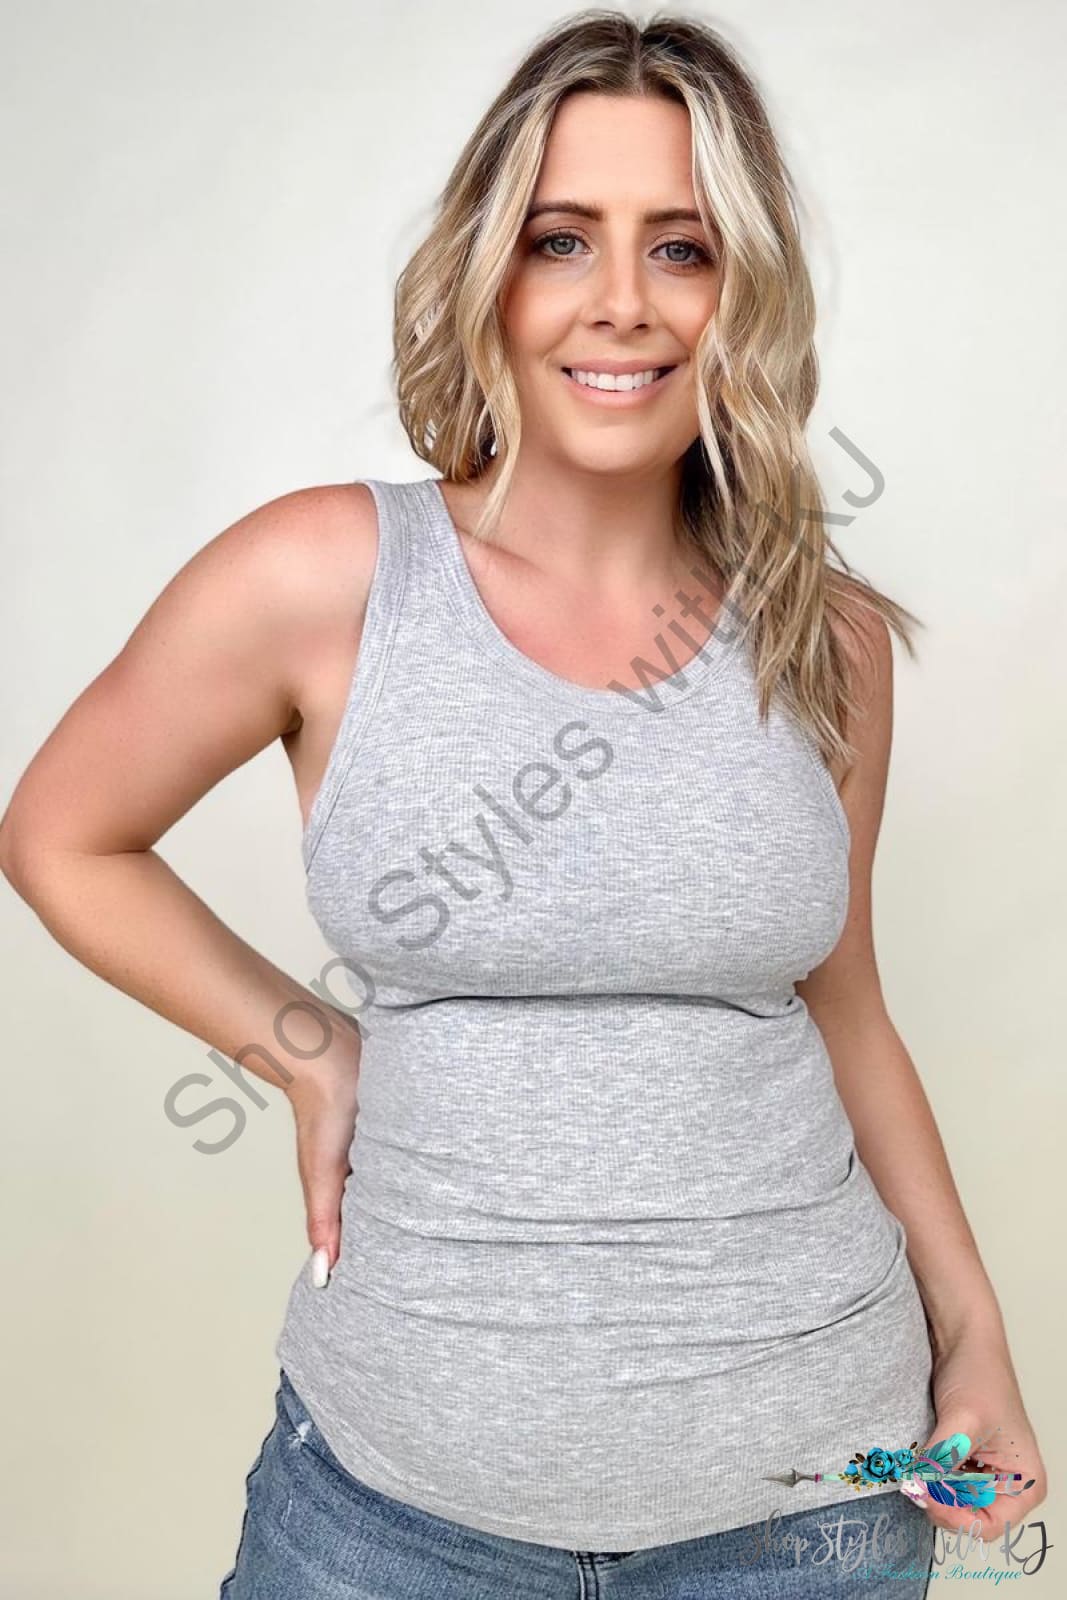 Fawnfit Slim Fit High Neck Ribbed Tank Top With Built-In Bra Gray / S Tops & Camis